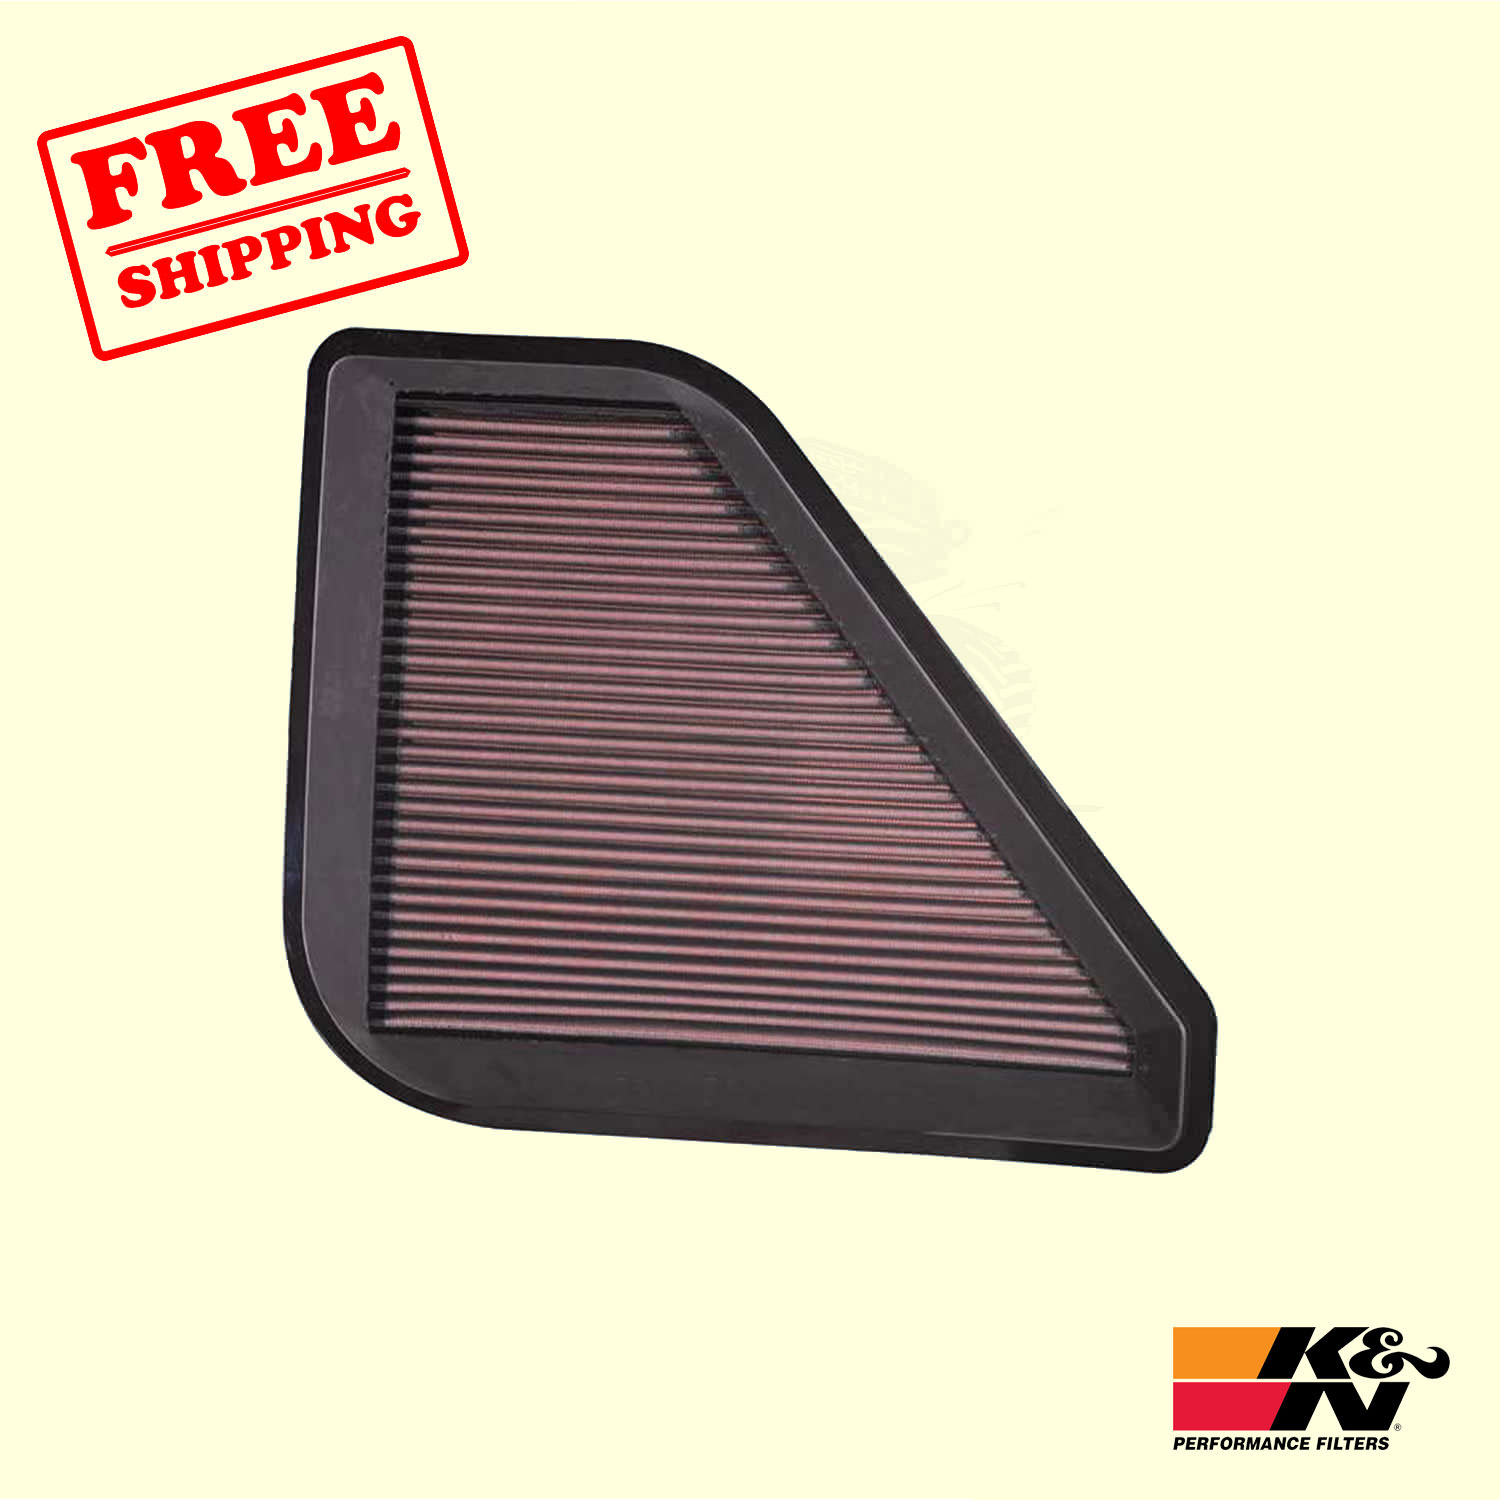 Air Filter for Buick Enclave 2008-2017 K&N | eBay 2019 Buick Enclave Cabin Air Filter Replacement